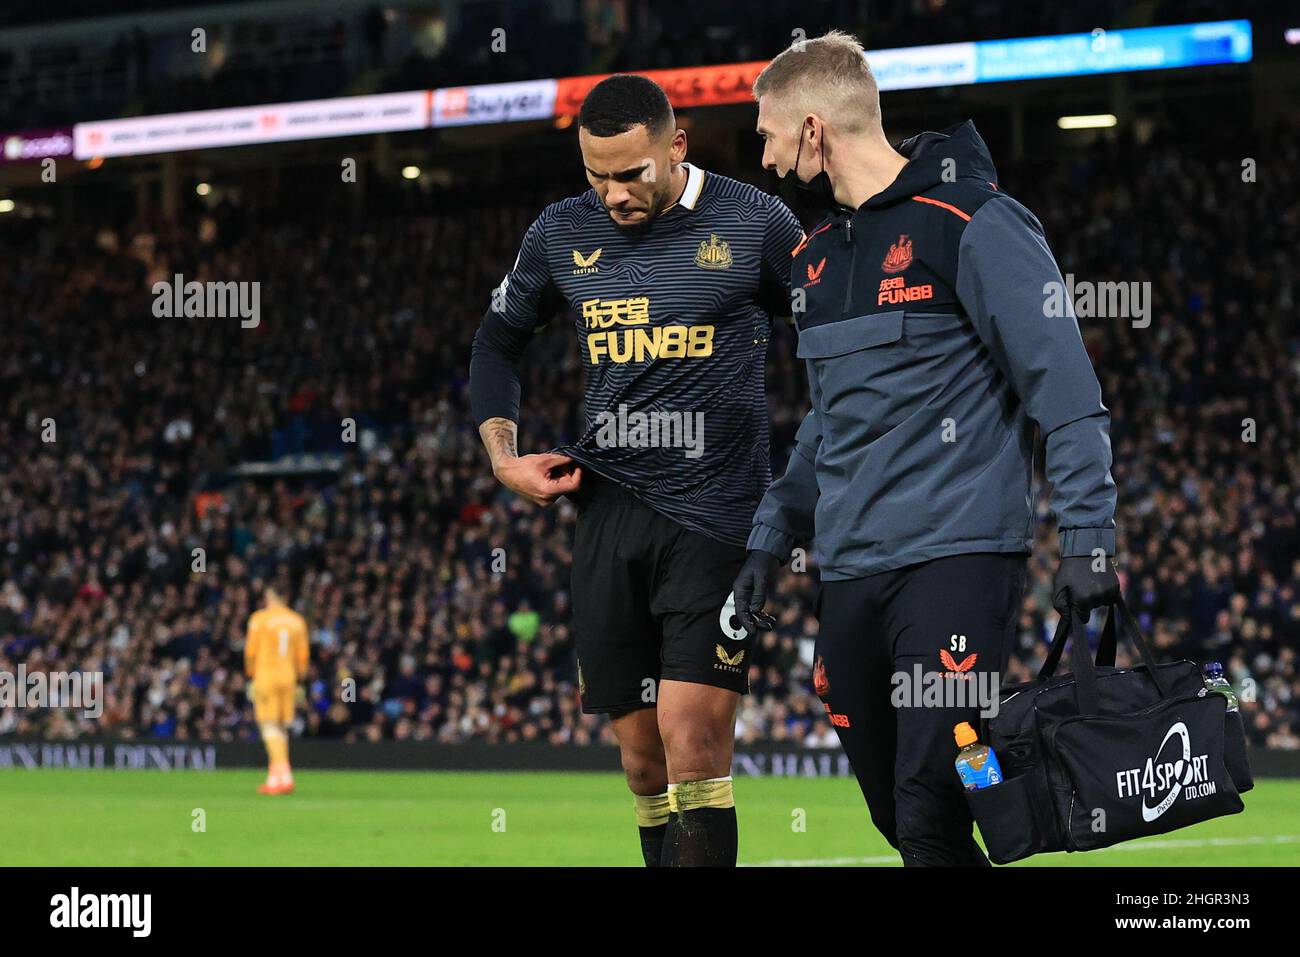 Leeds, UK. 22nd Jan, 2022. Jamaal Lascelles #6 of Newcastle United limps off injured after being substituted during the Premier League fixture Leeds United vs Newcastle United at Elland Road, Leeds, UK, 22nd January 2022 Credit: News Images /Alamy Live News Stock Photo